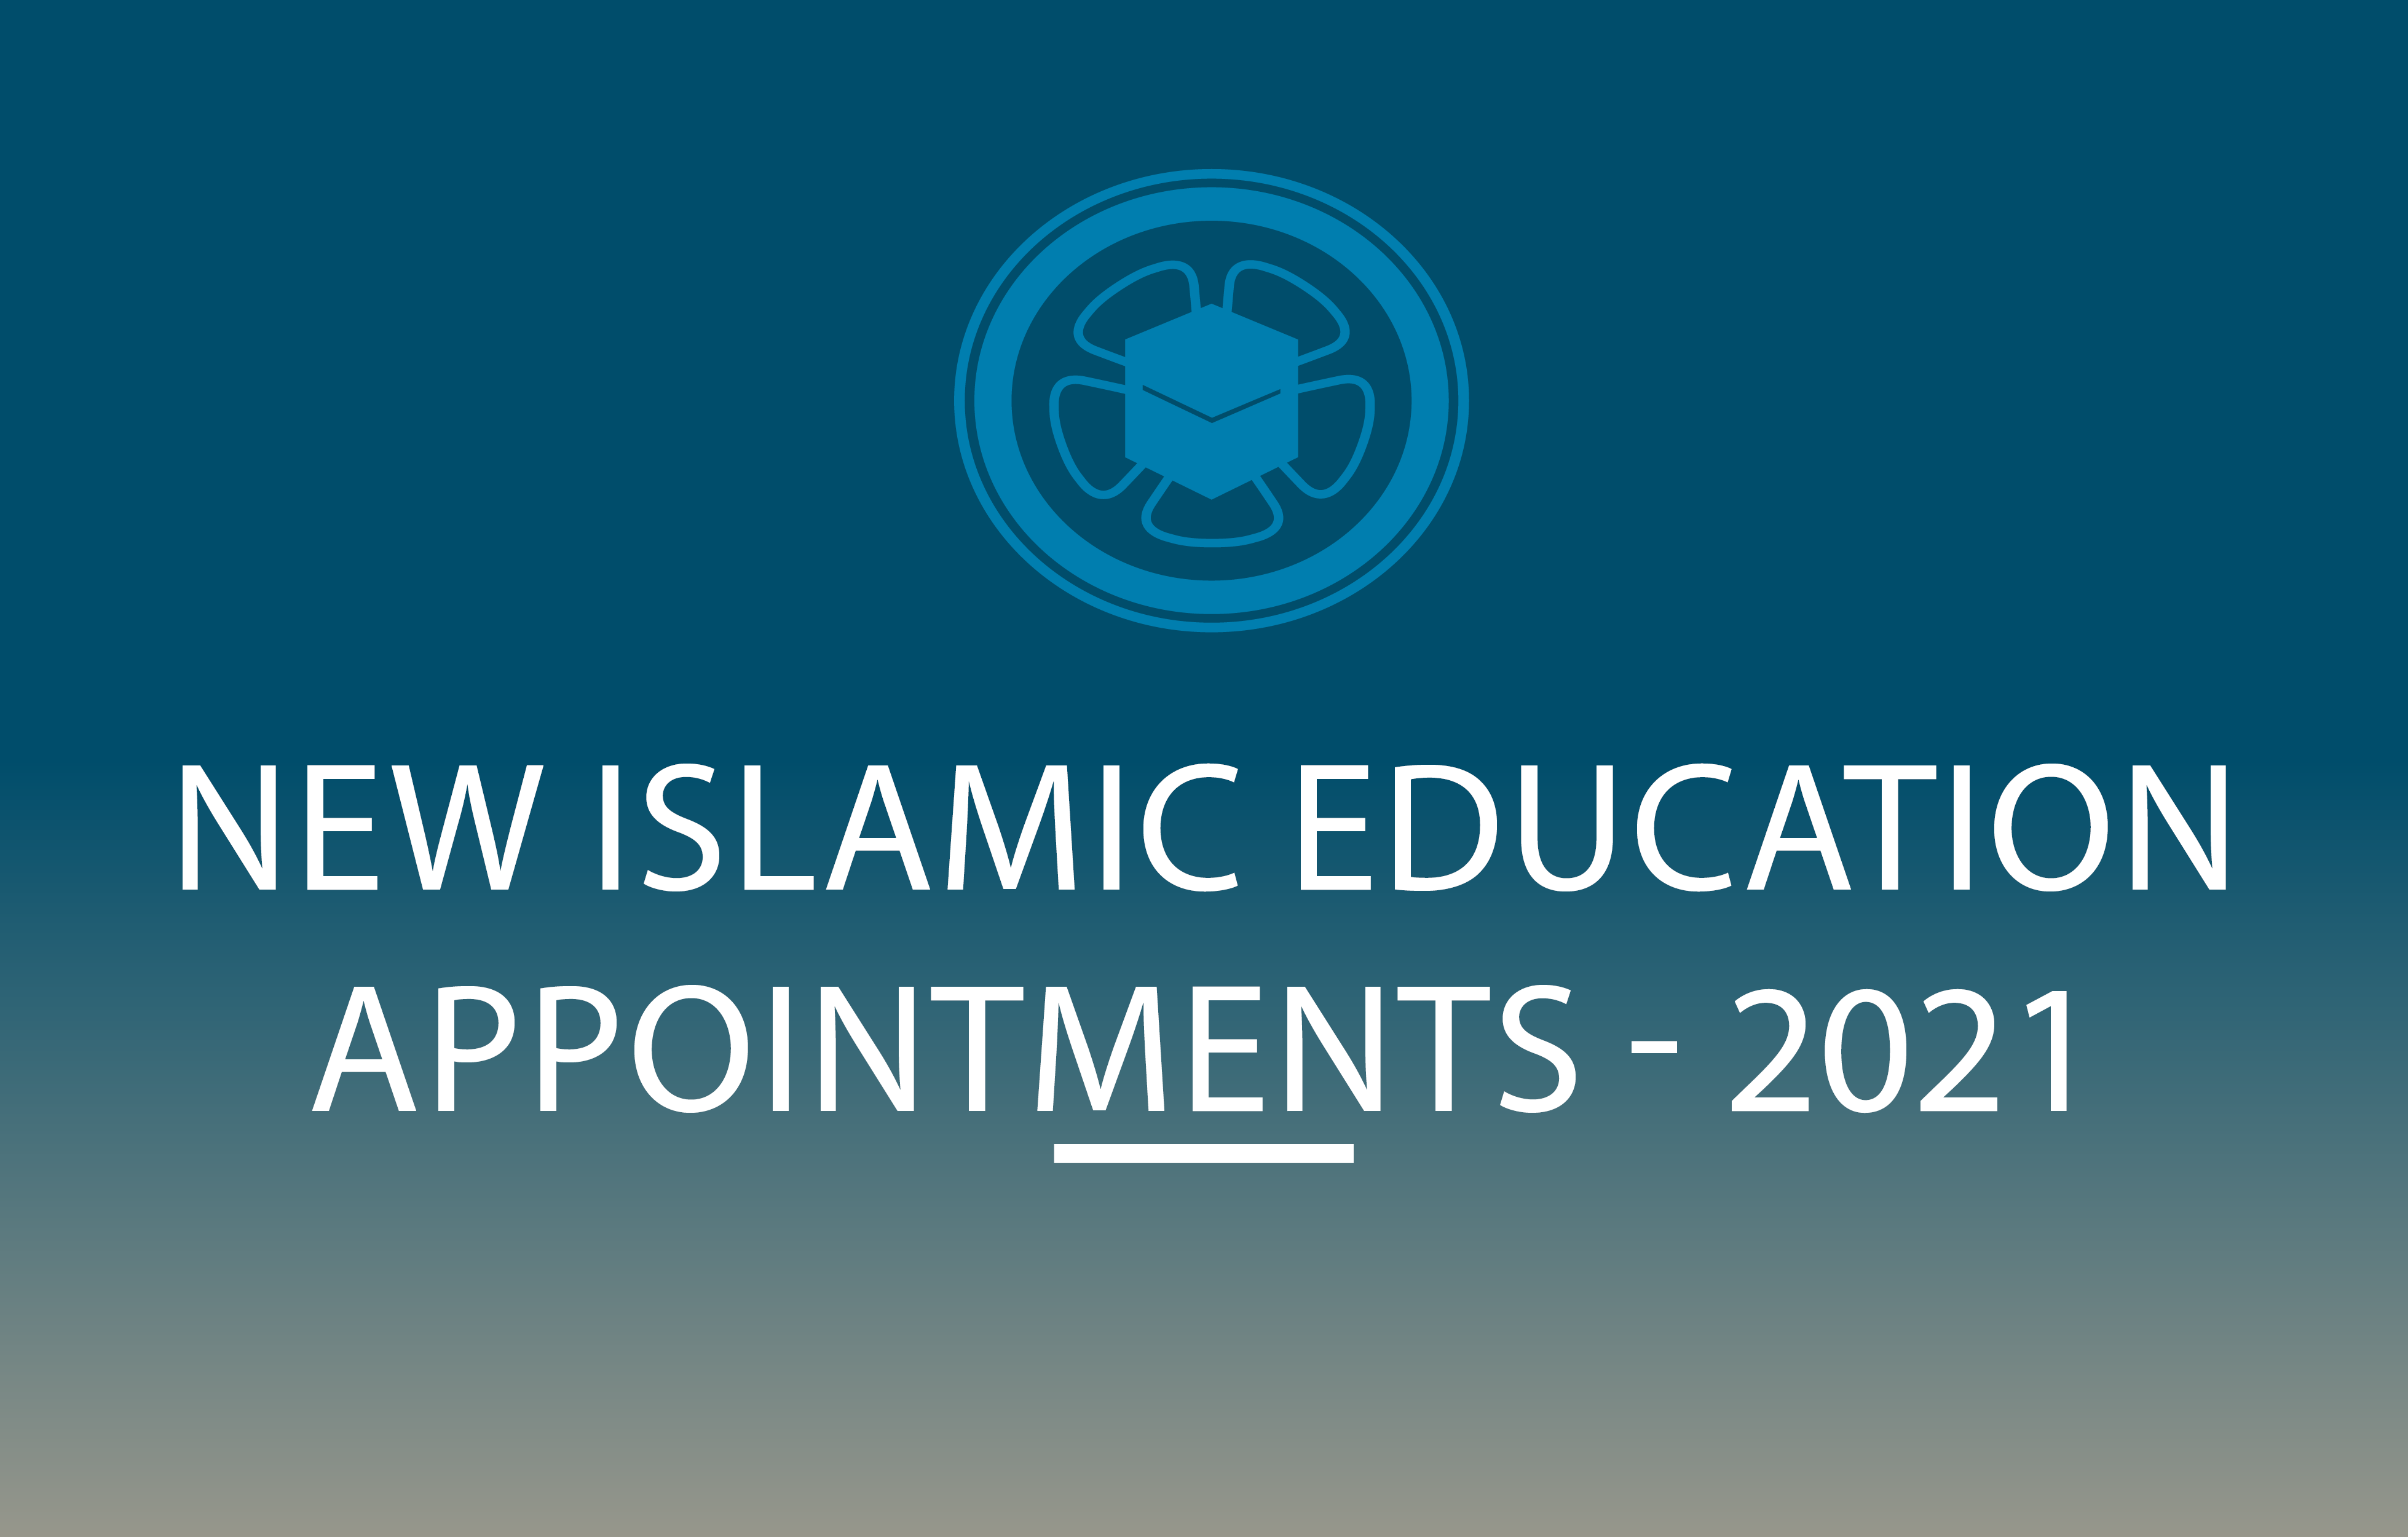 New Islamic Education Appointments 2021